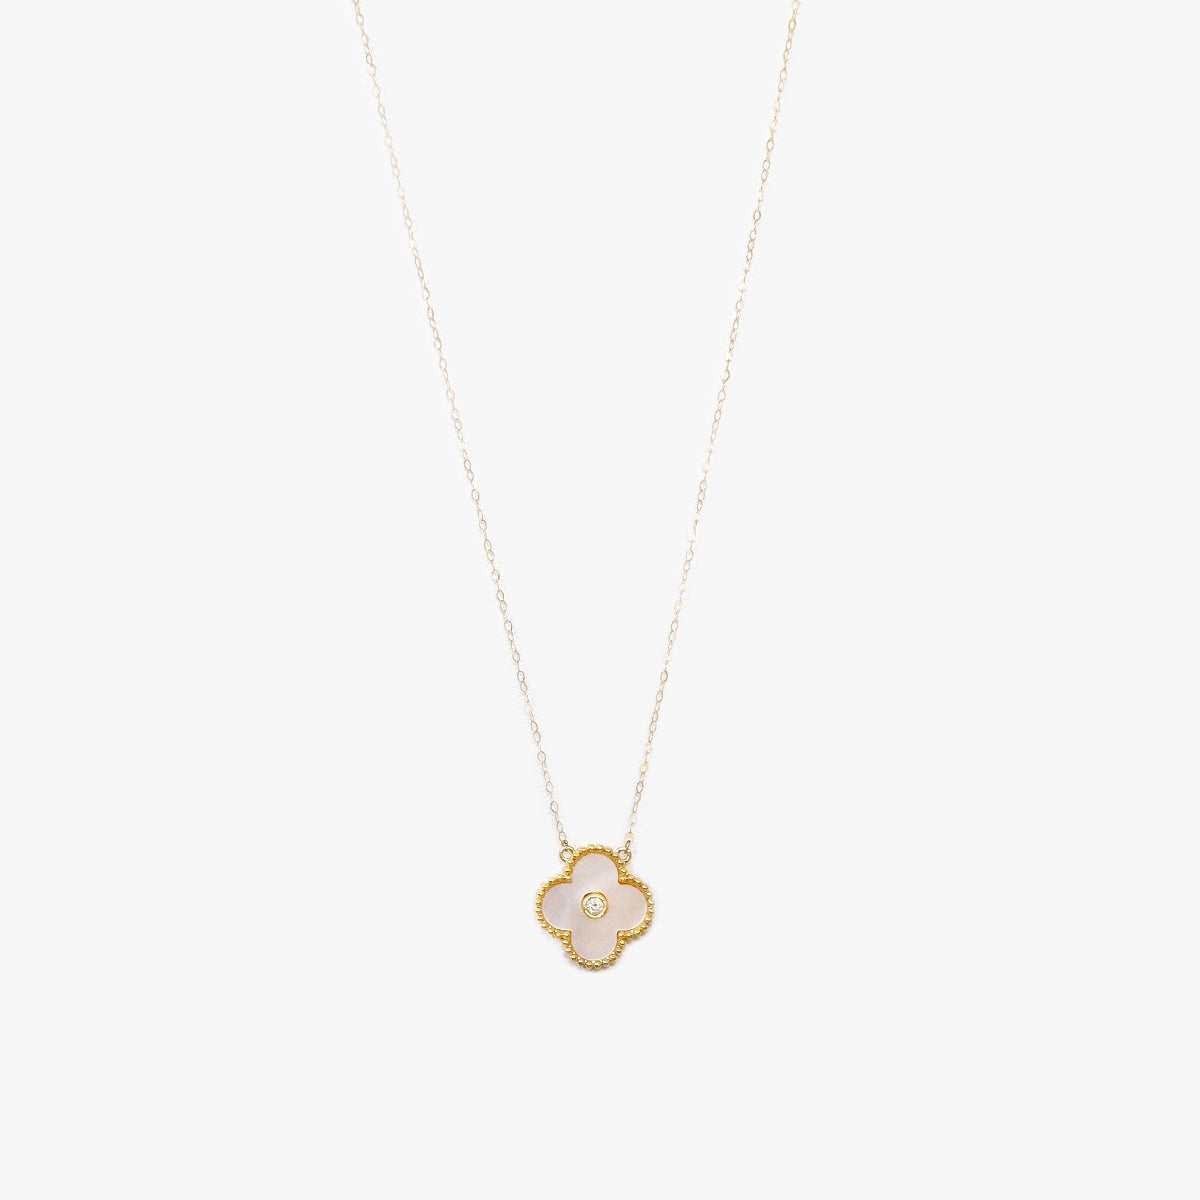 The Designer Pearl and Diamond Necklace in Solid Gold – Flecked with Gold